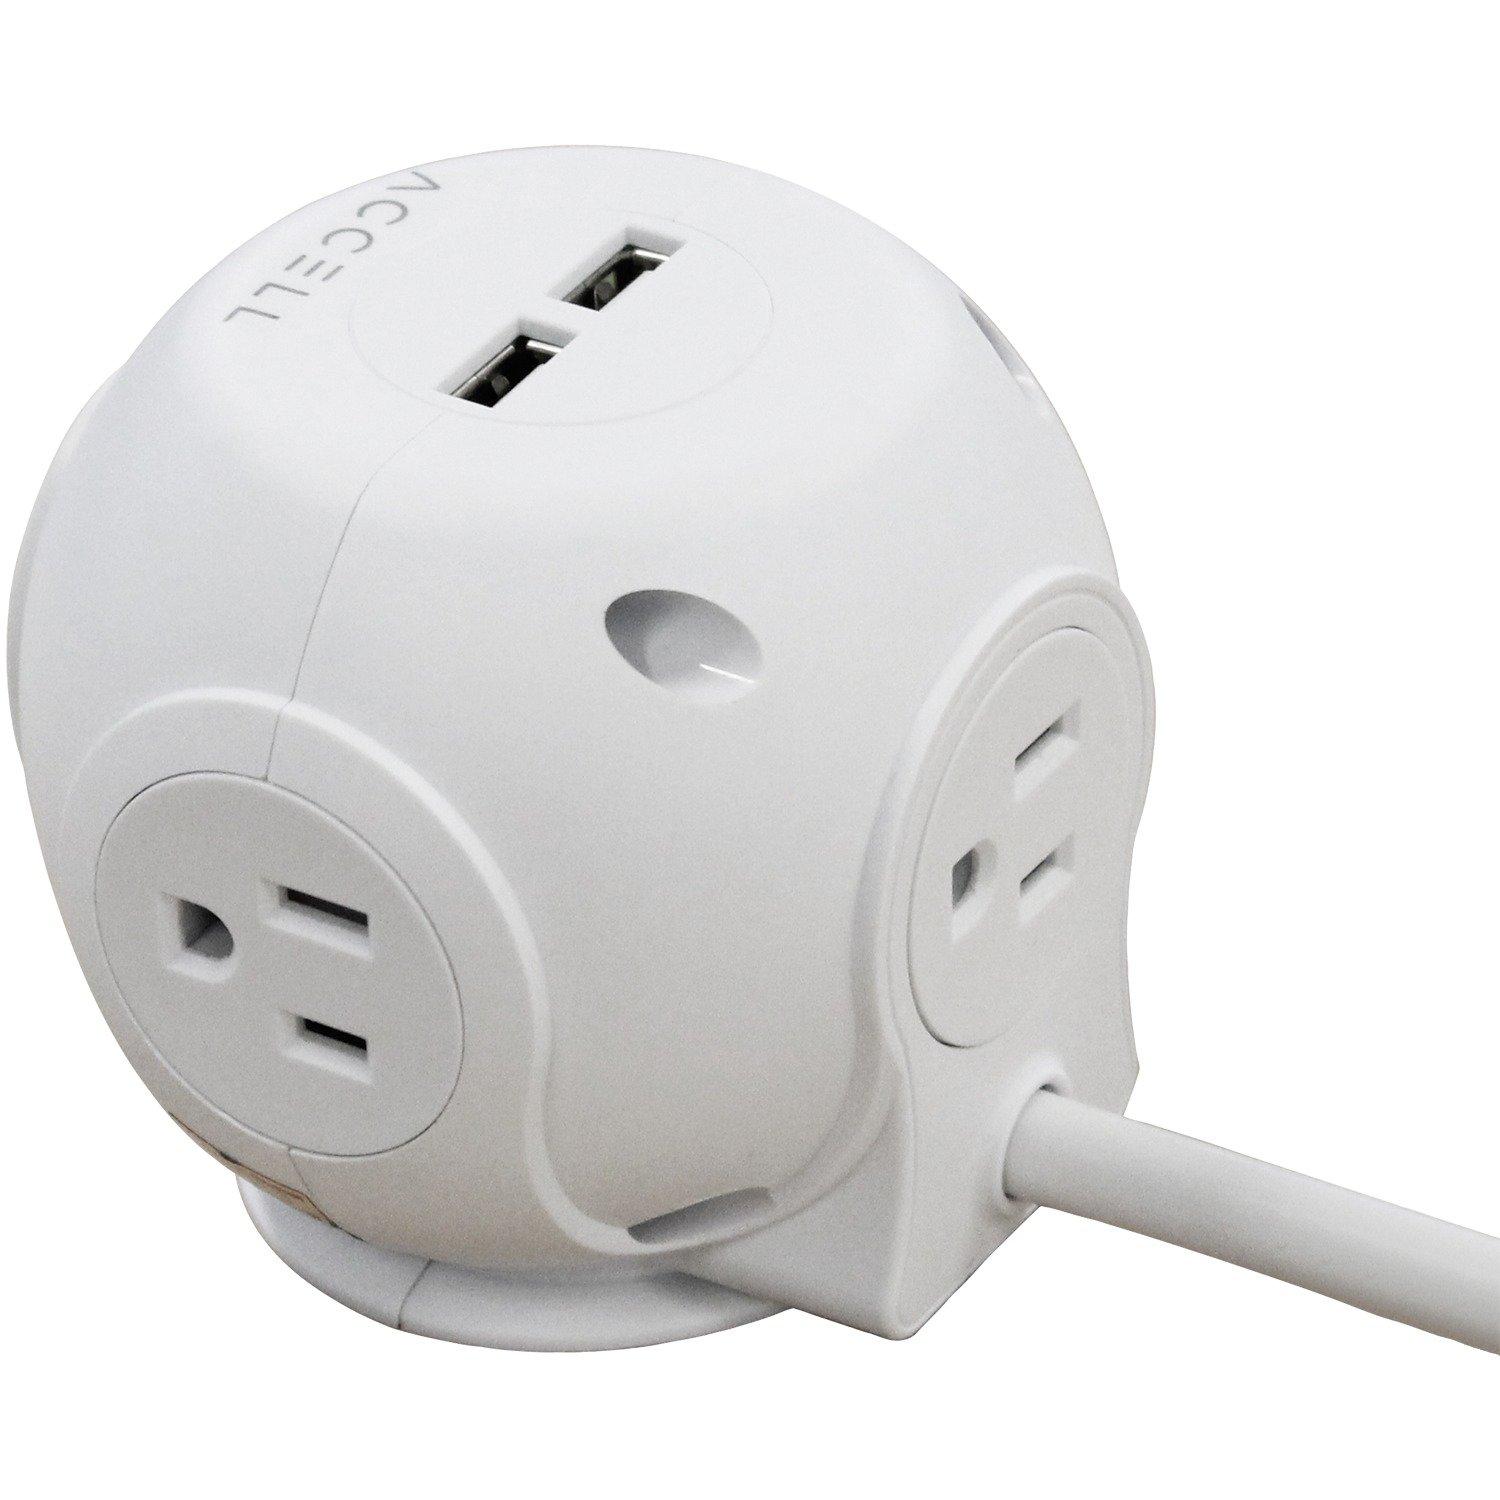 list item 4 of 5 Power Cutie White Compact Surge Protector